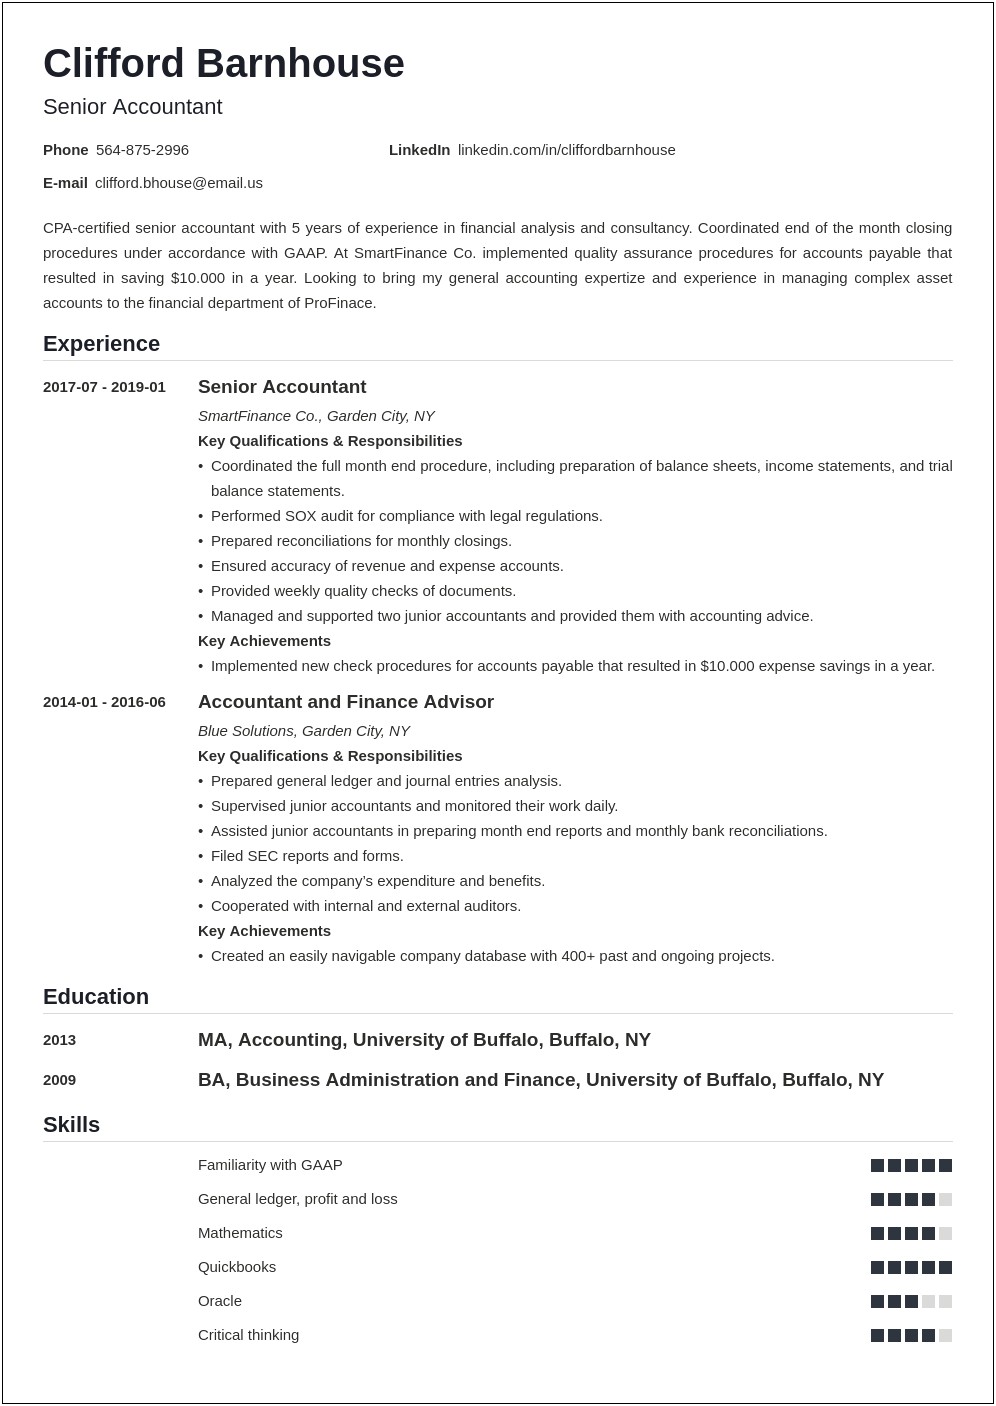 Resume Template Without Work Experience Required For Cpa